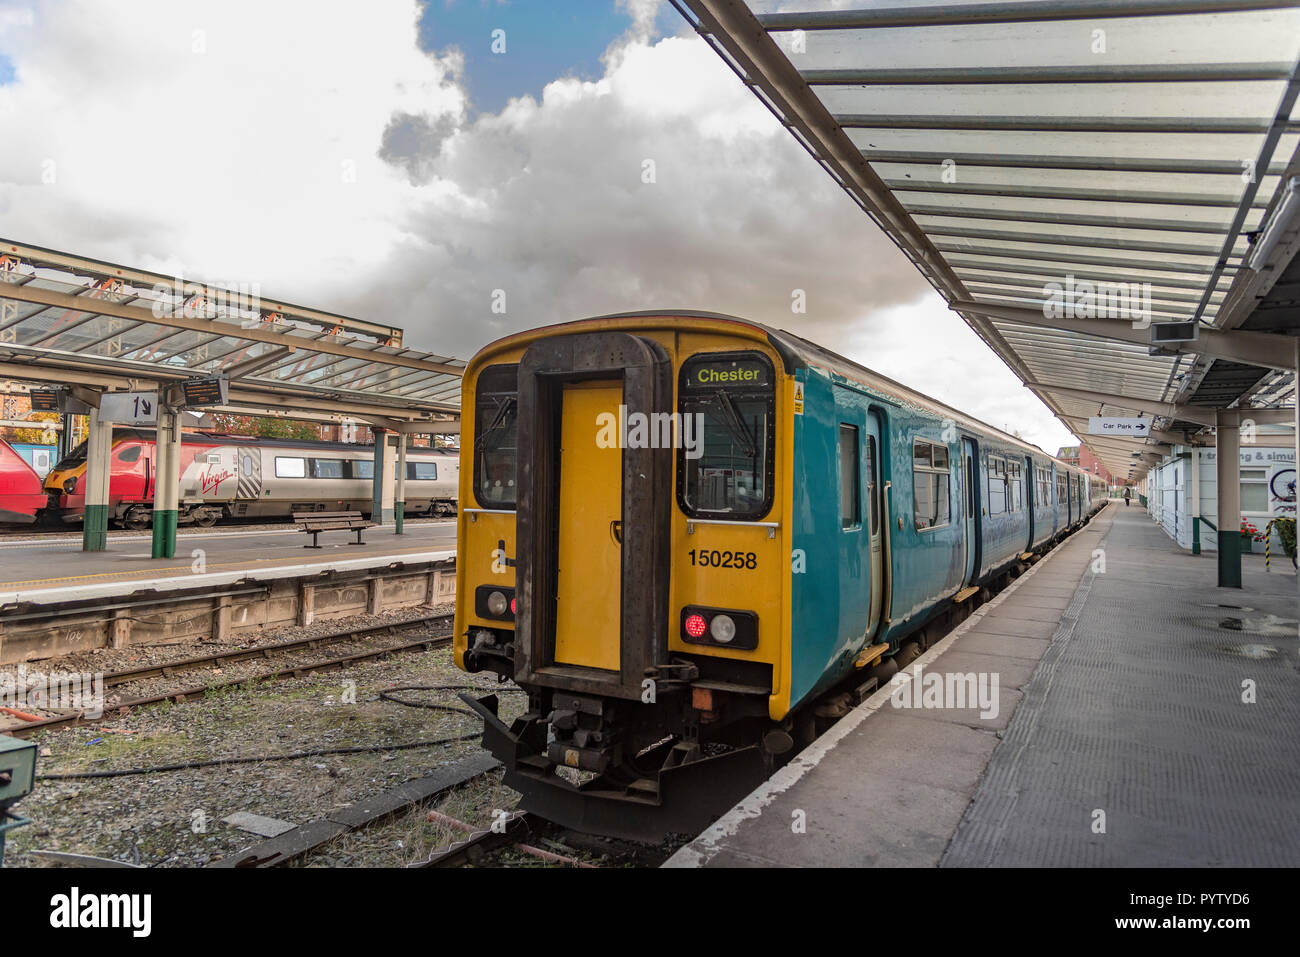 Chester North West England. Railway station and trains. Stock Photo